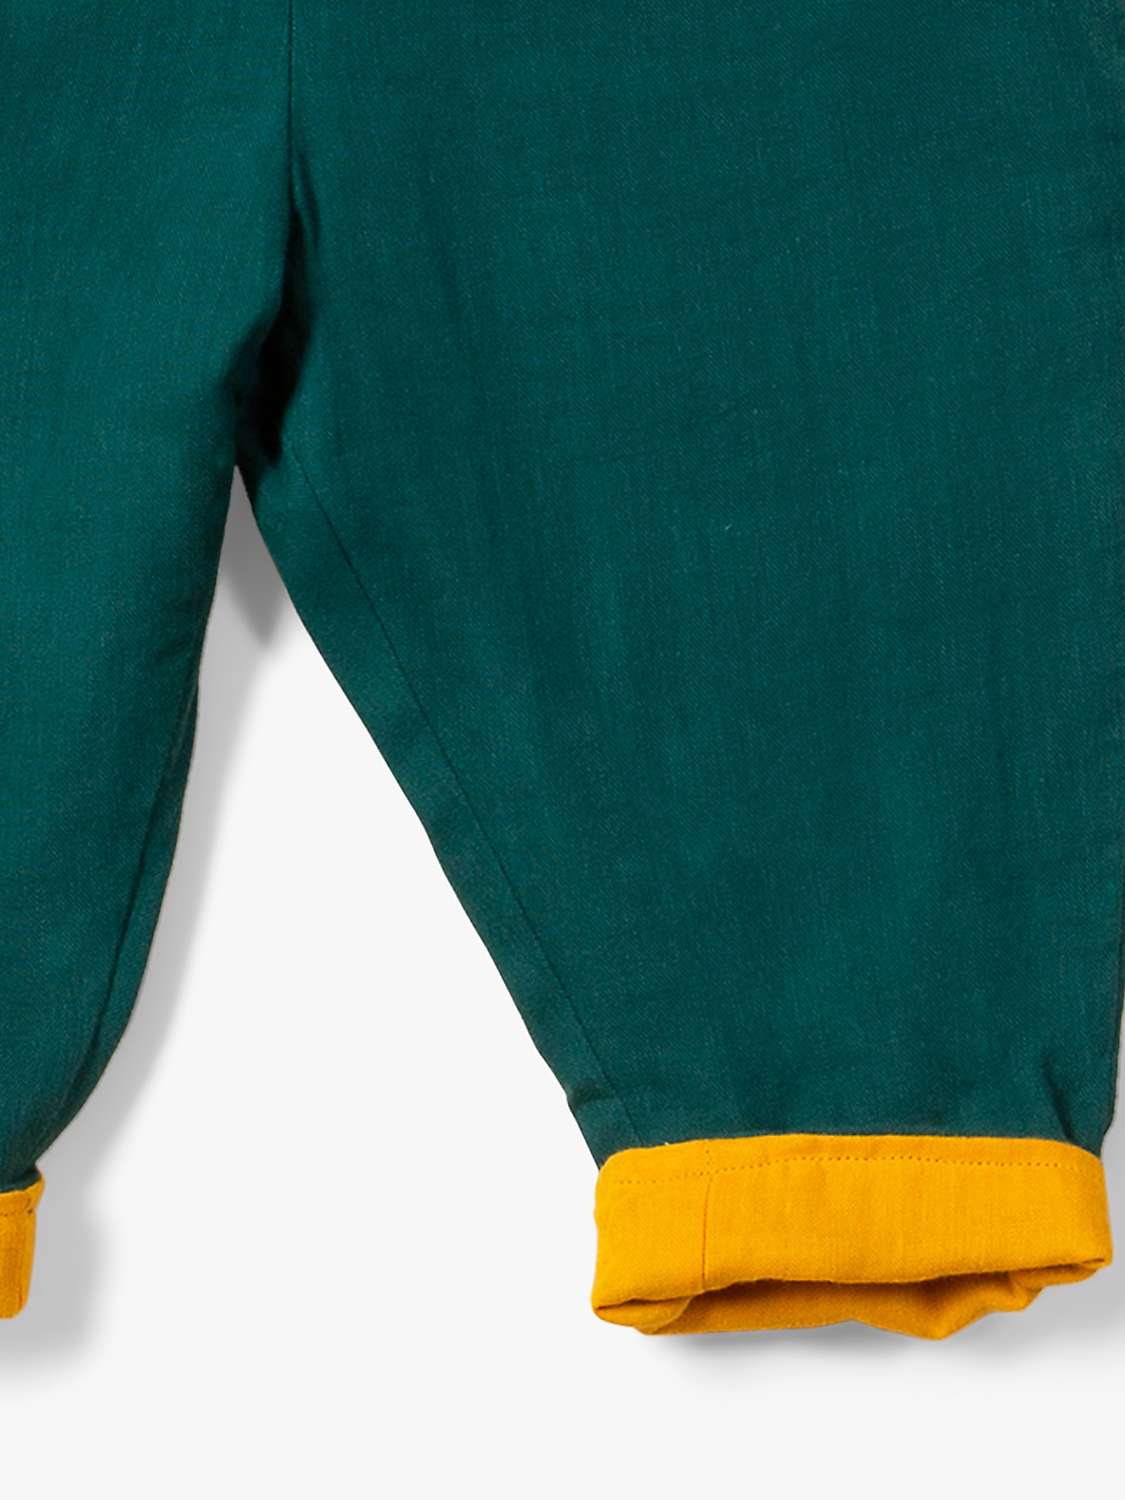 Buy Little Green Radicals Baby Organic Cotton Reversible Pull On Trousers, Gold/Green Online at johnlewis.com